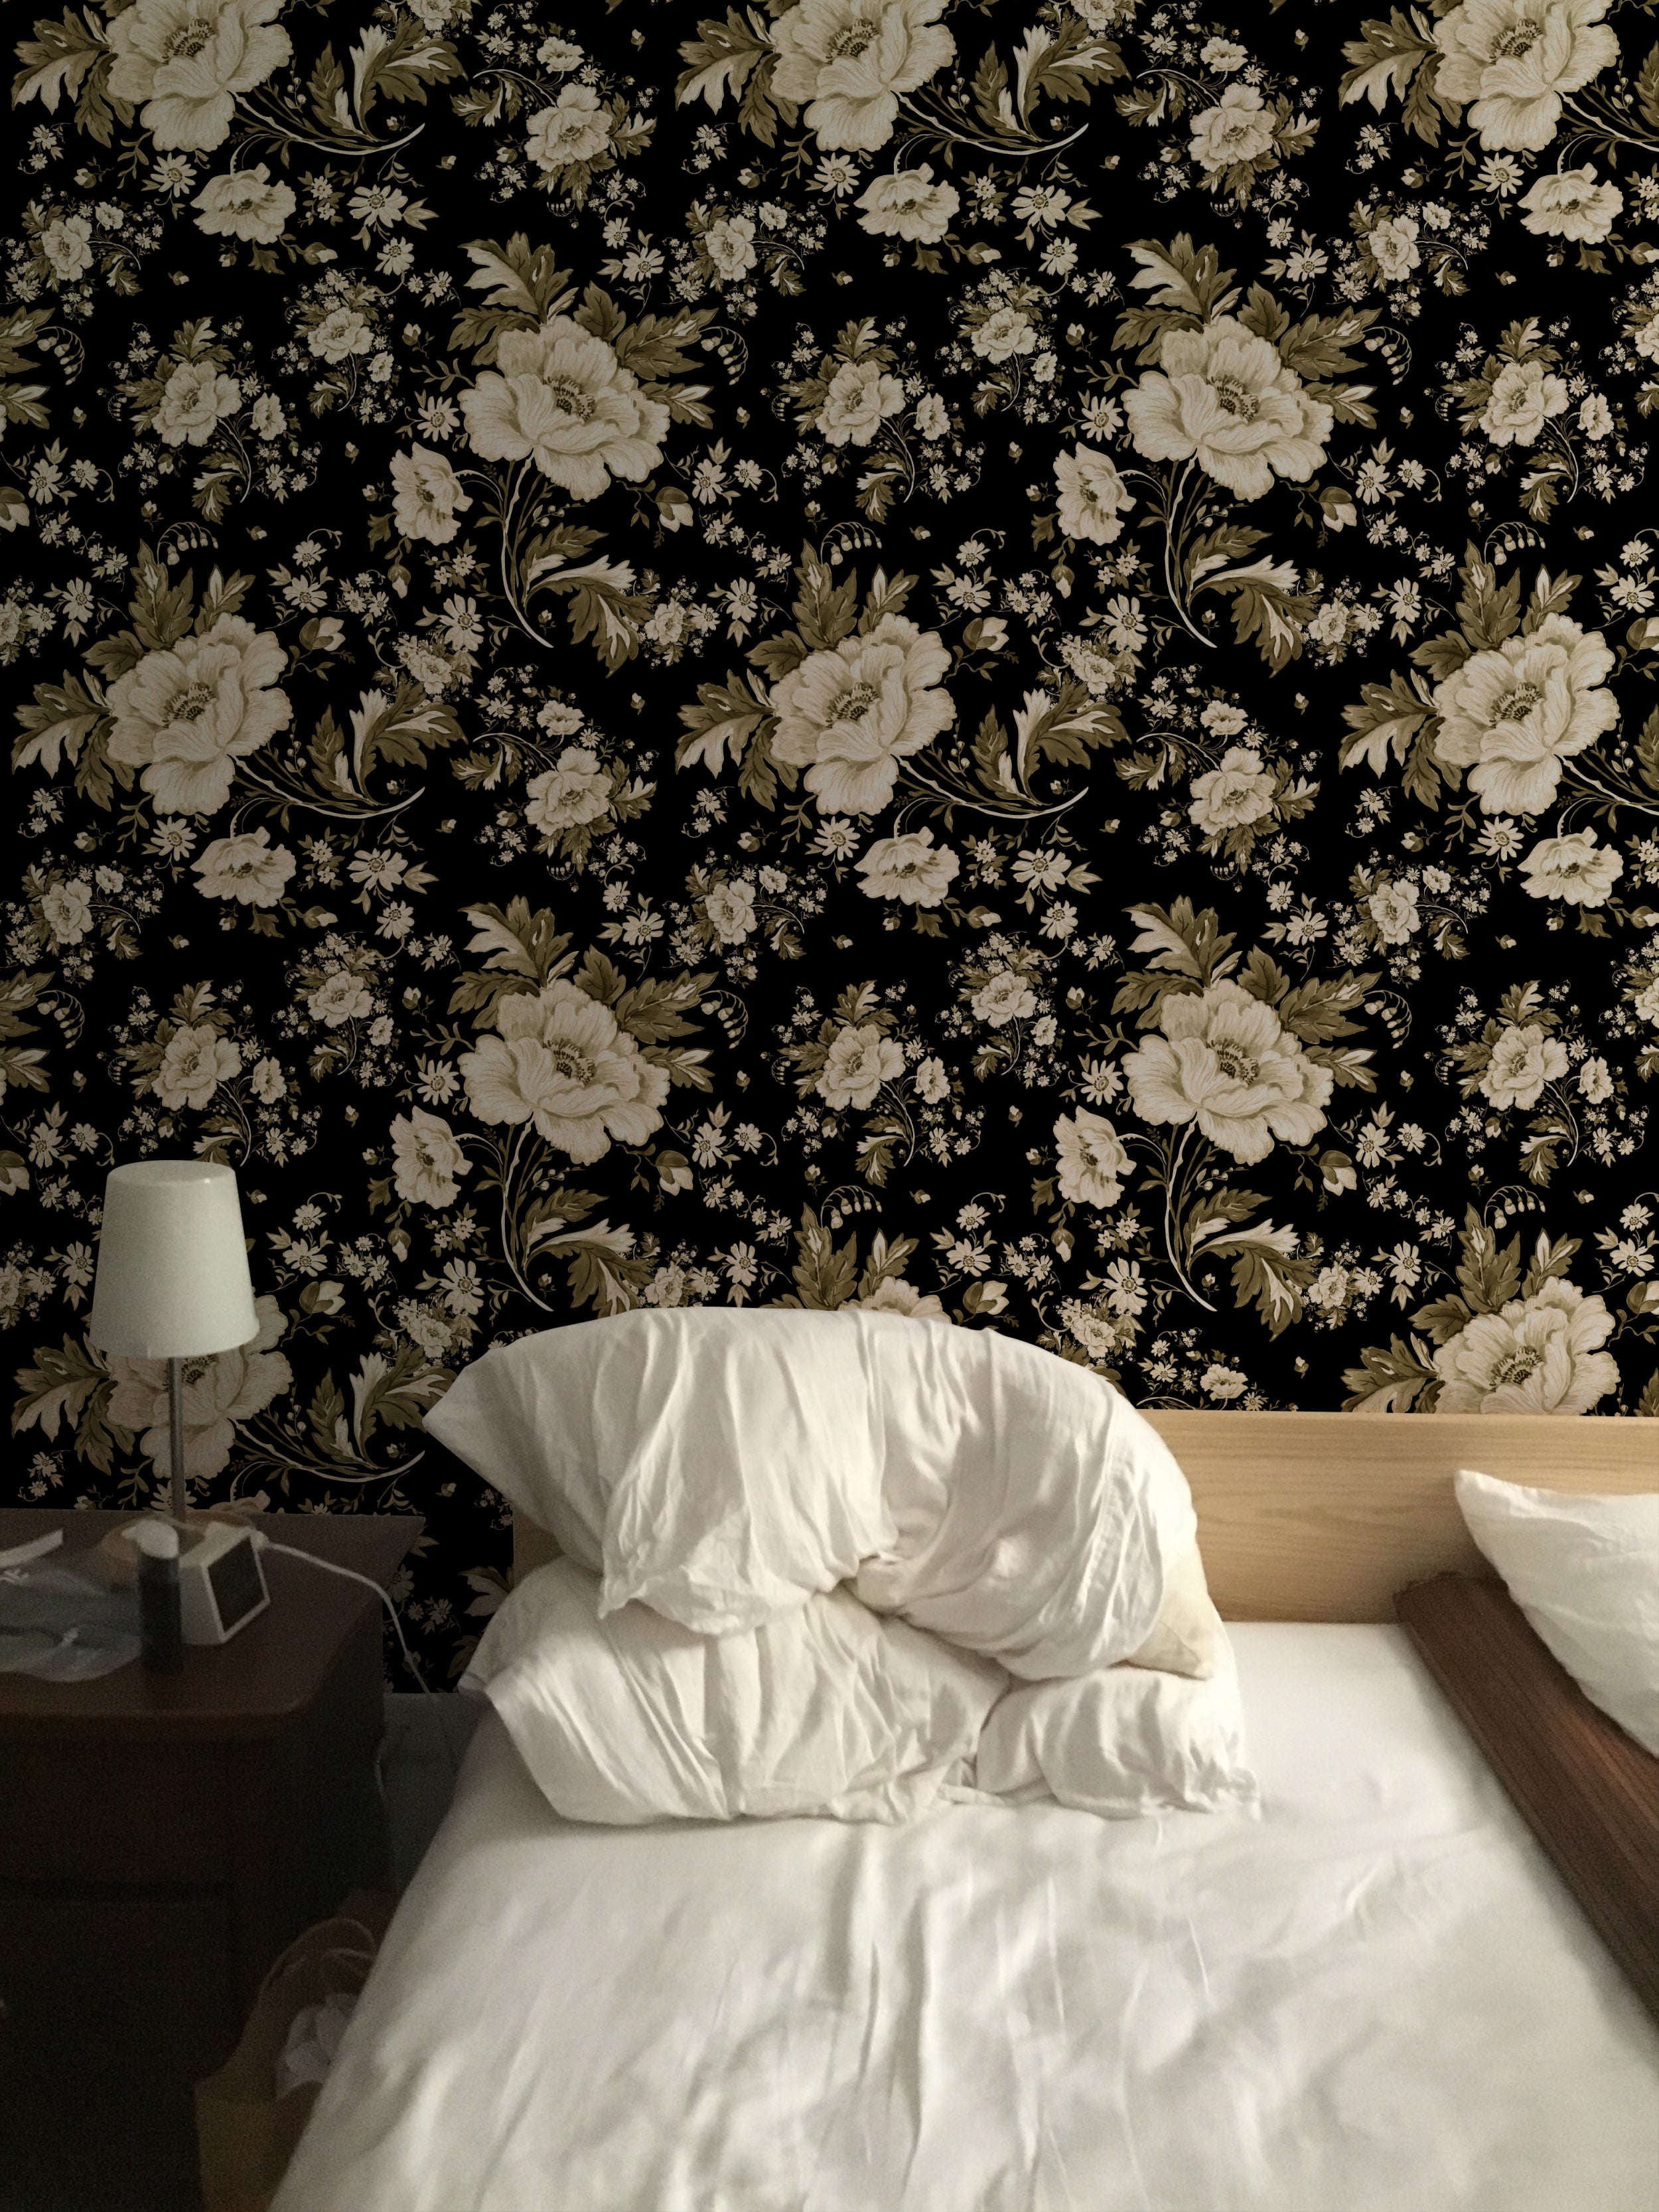 The Drama of Dark Florals: How to Incorporate Bold Floral Wallpaper into Your Home